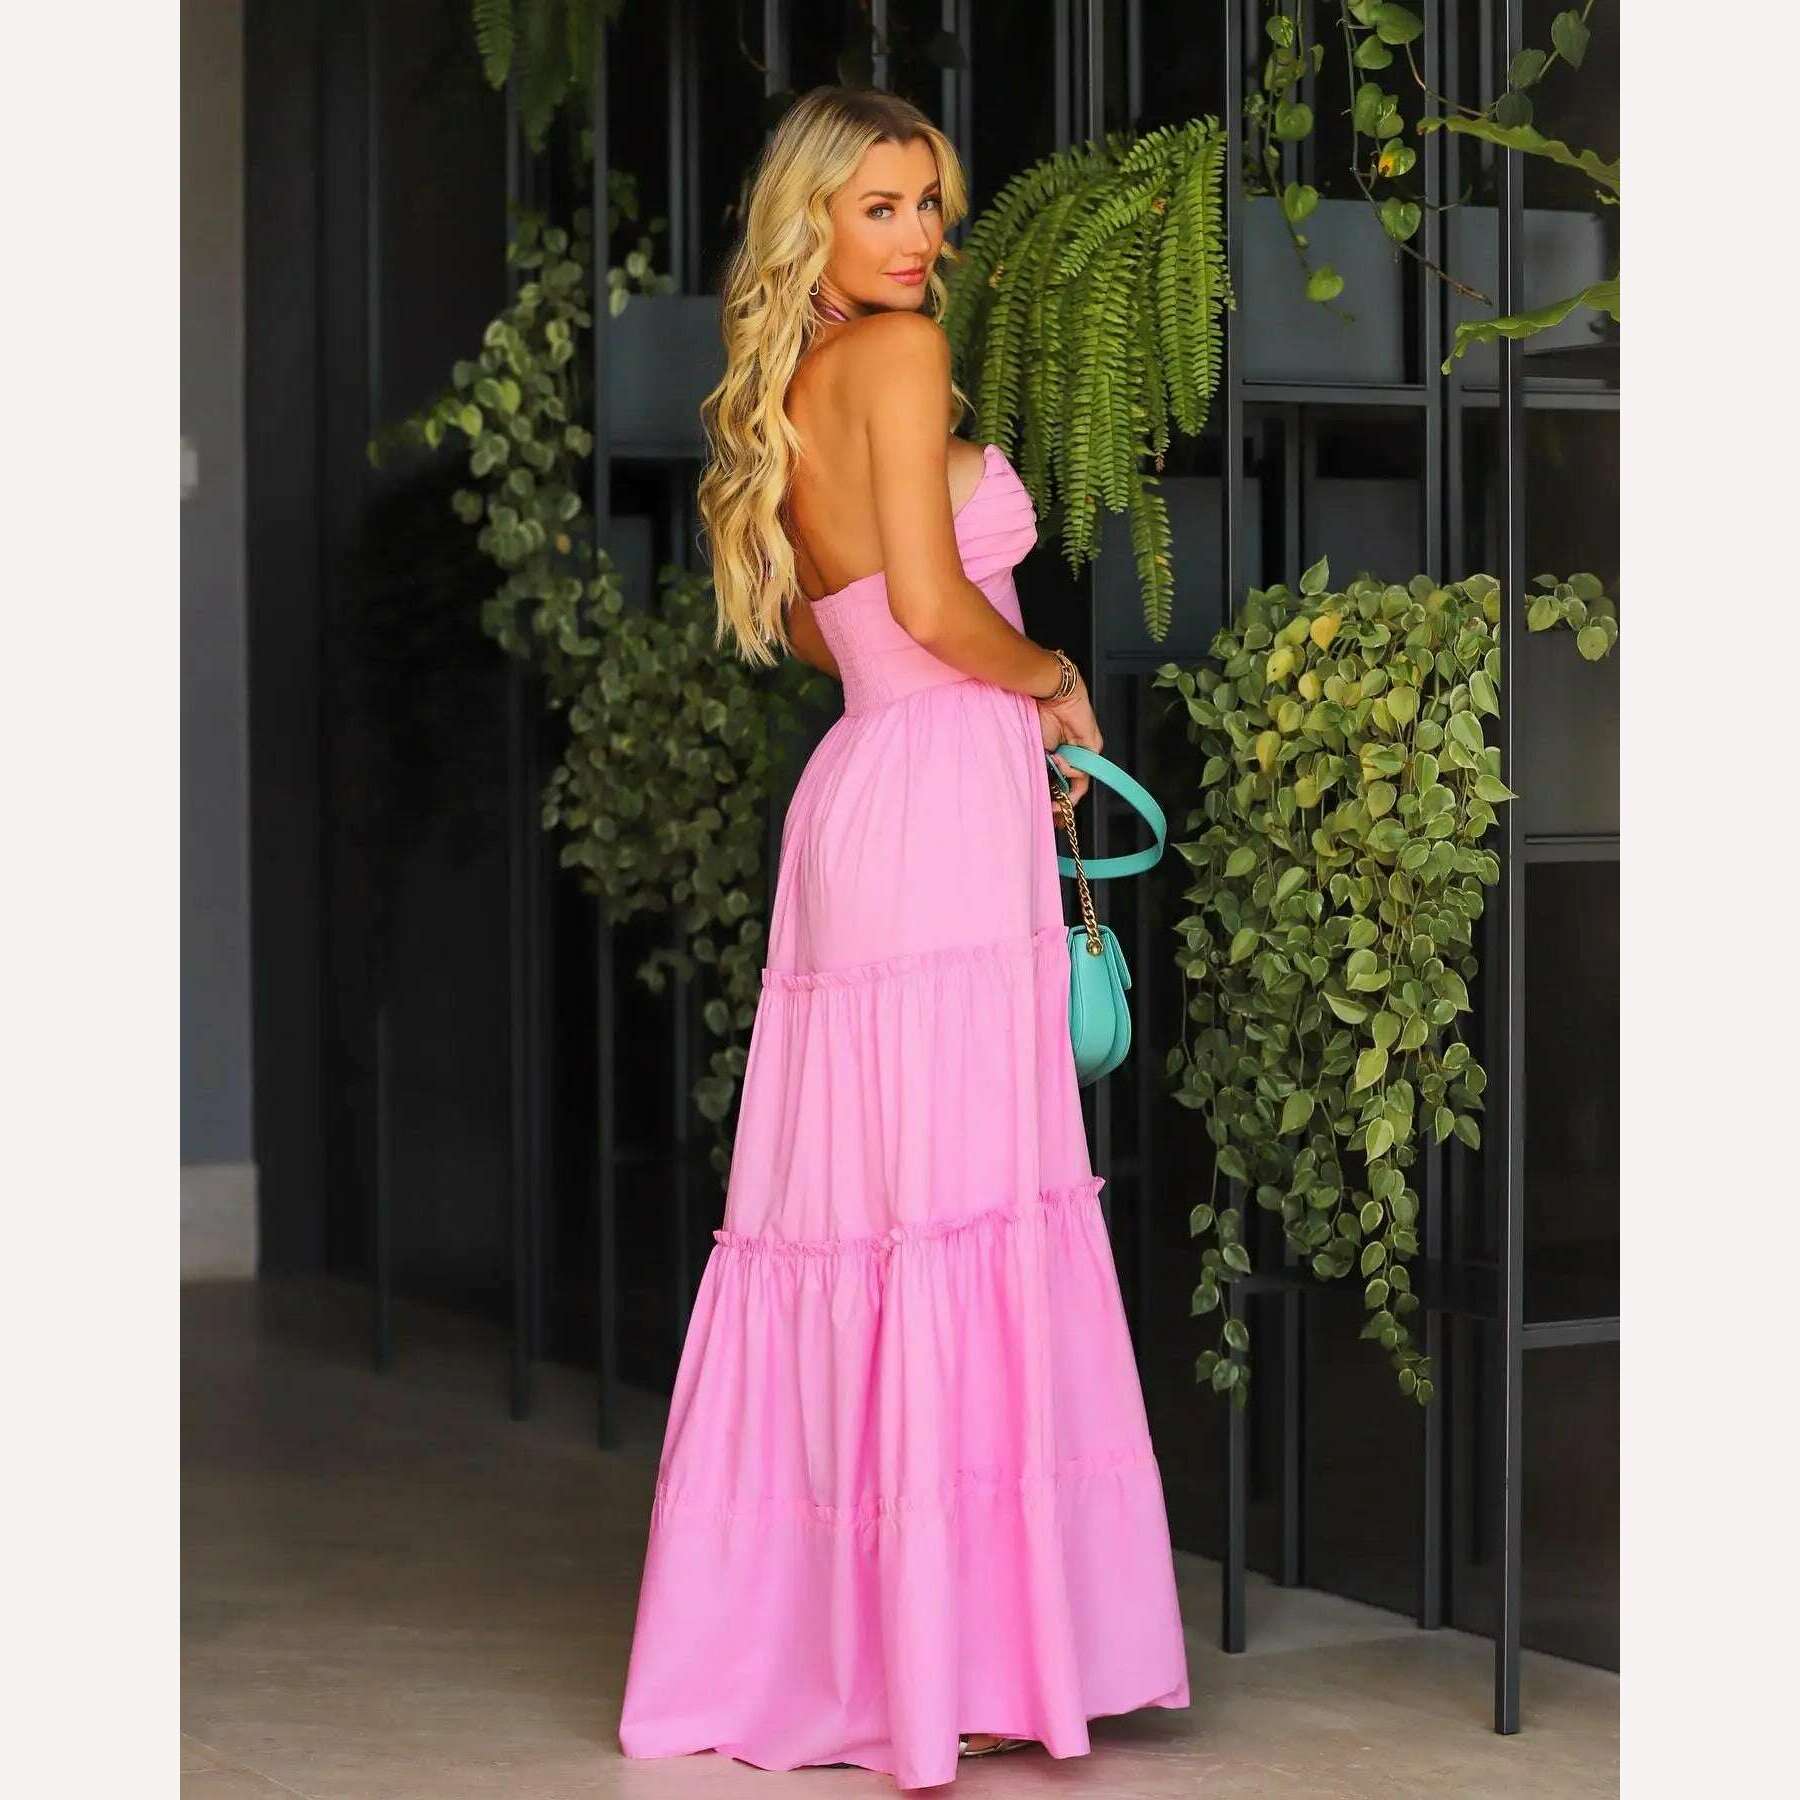 KIMLUD, 2023 Summer New Fashion Women Dresses Elegant Party Female Evening Dress Sexy Women's Clothing Chic Robes, KIMLUD Women's Clothes